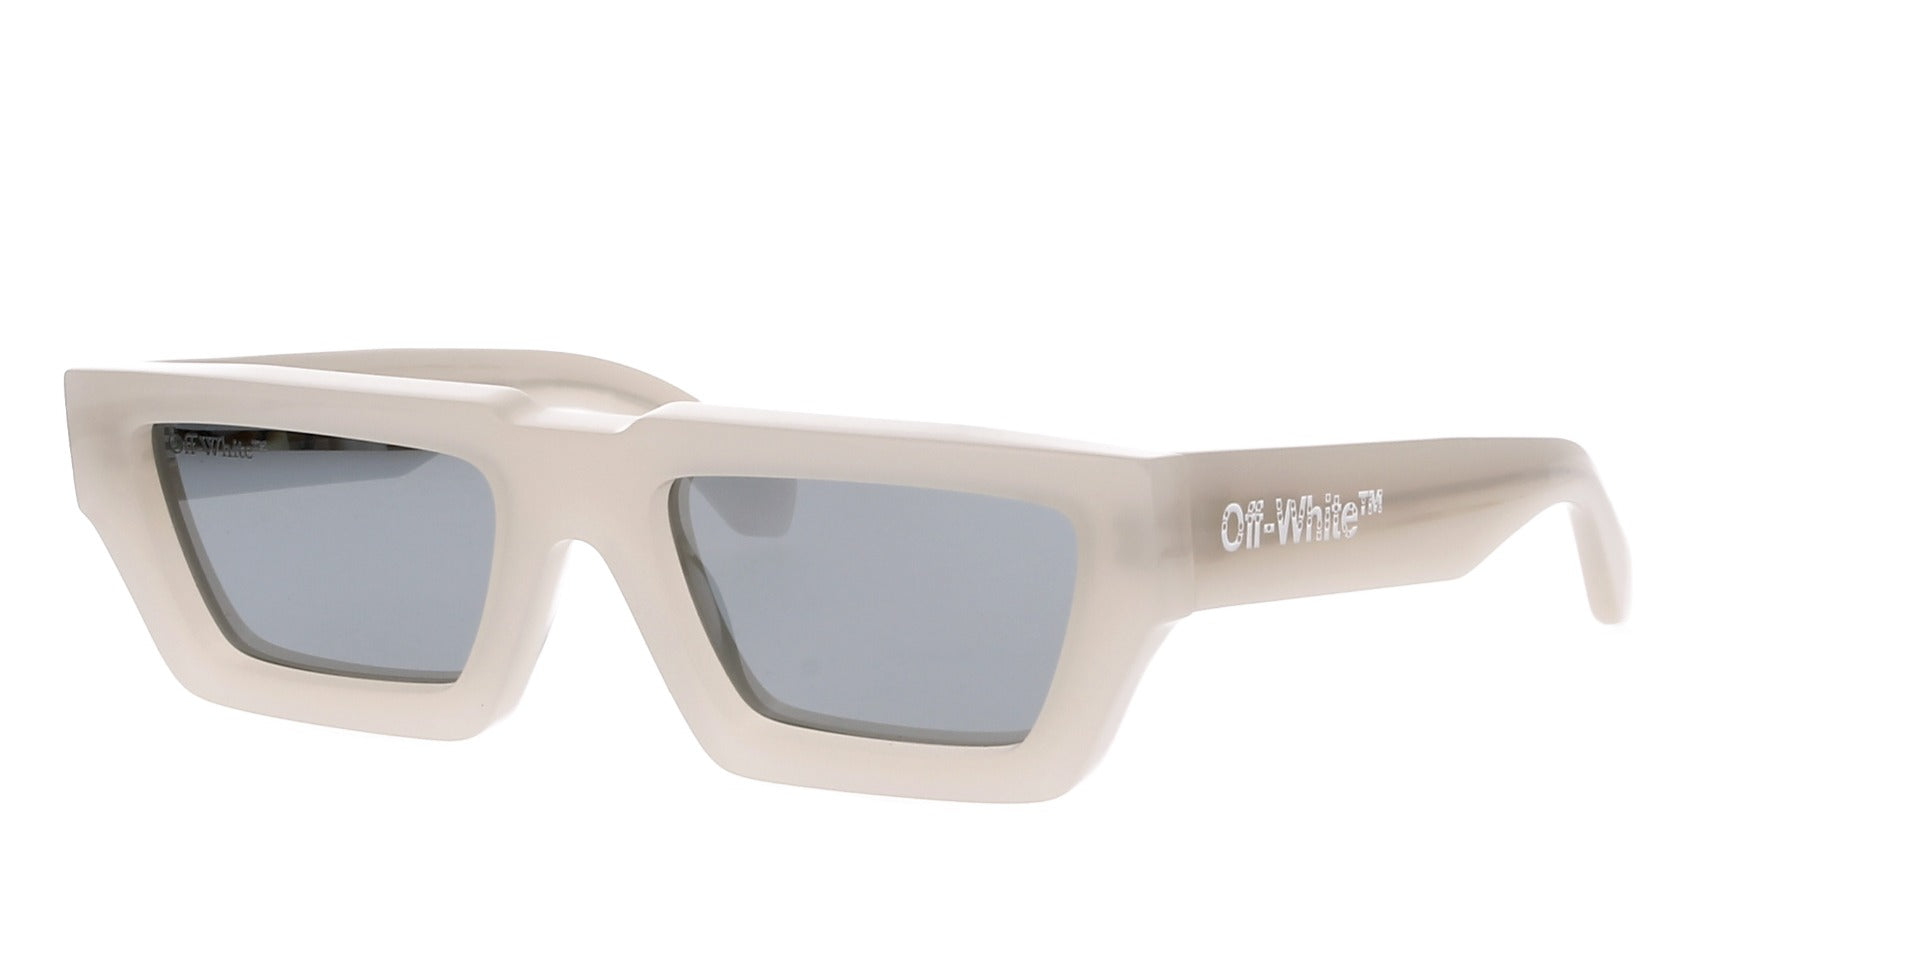 MANCHESTER SUNGLASSES in grey